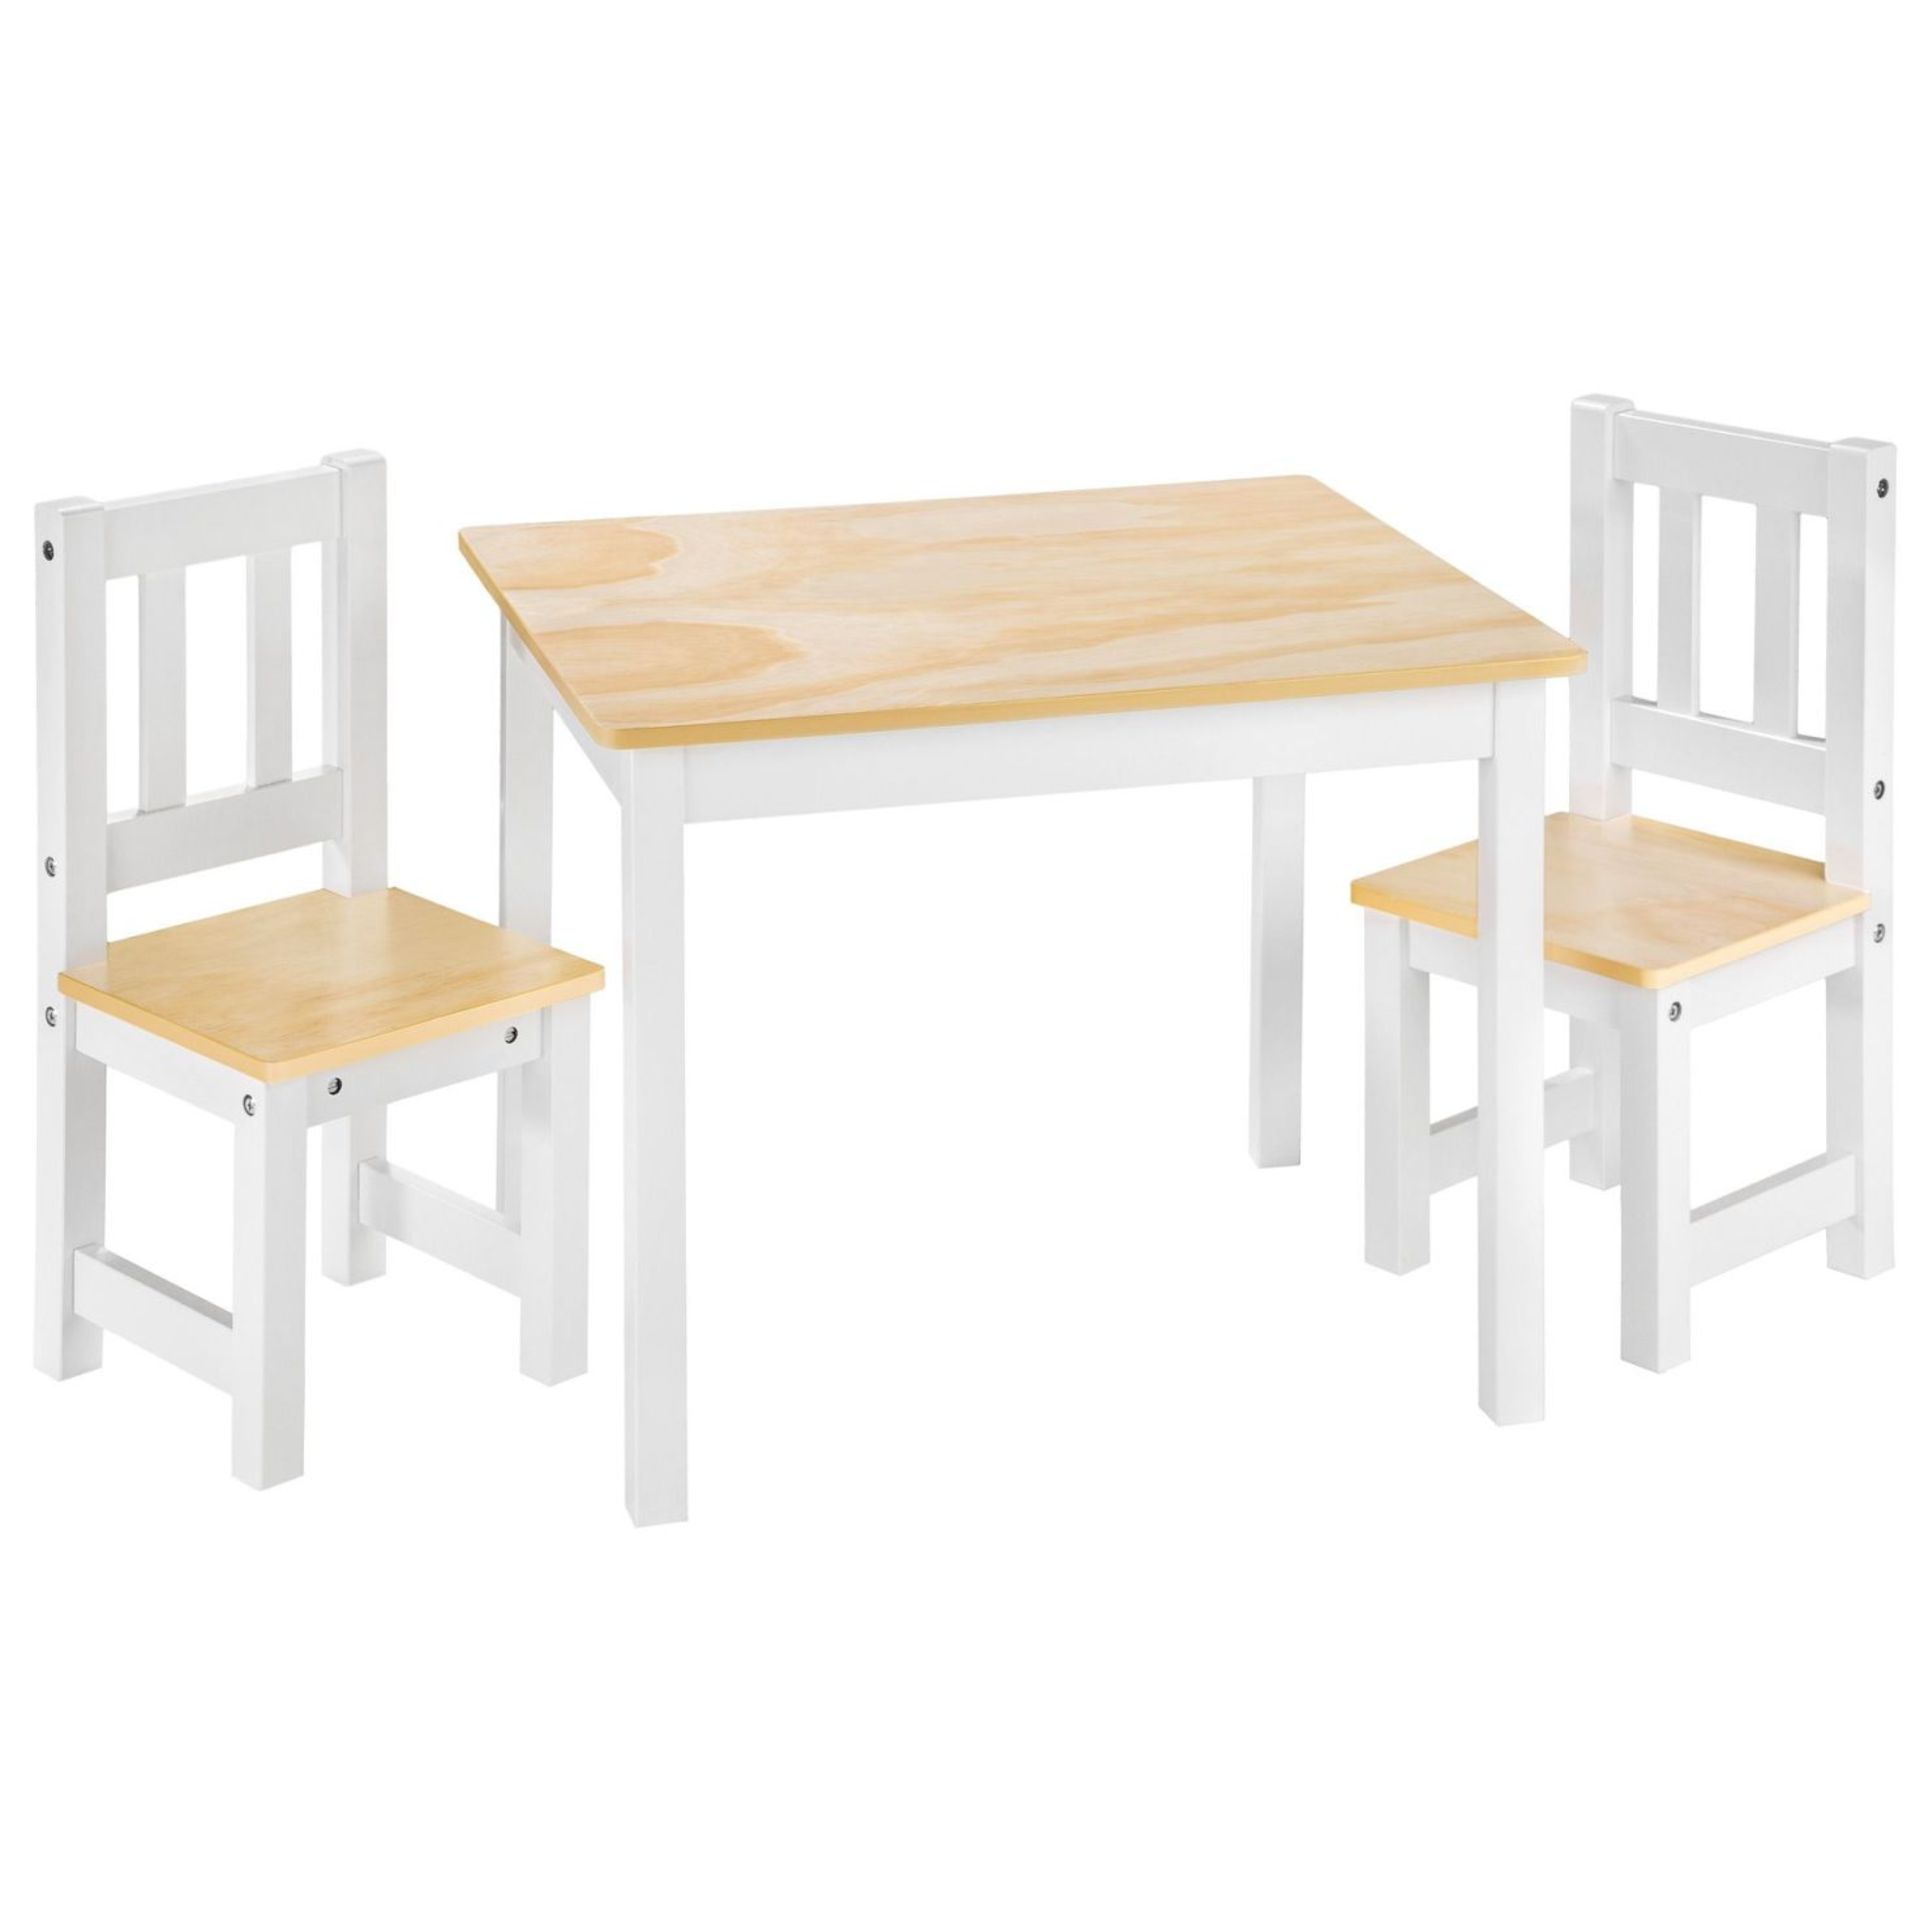 Tectake - Kids Table And Chairs Set Alice White - Boxed. RRP £59.99